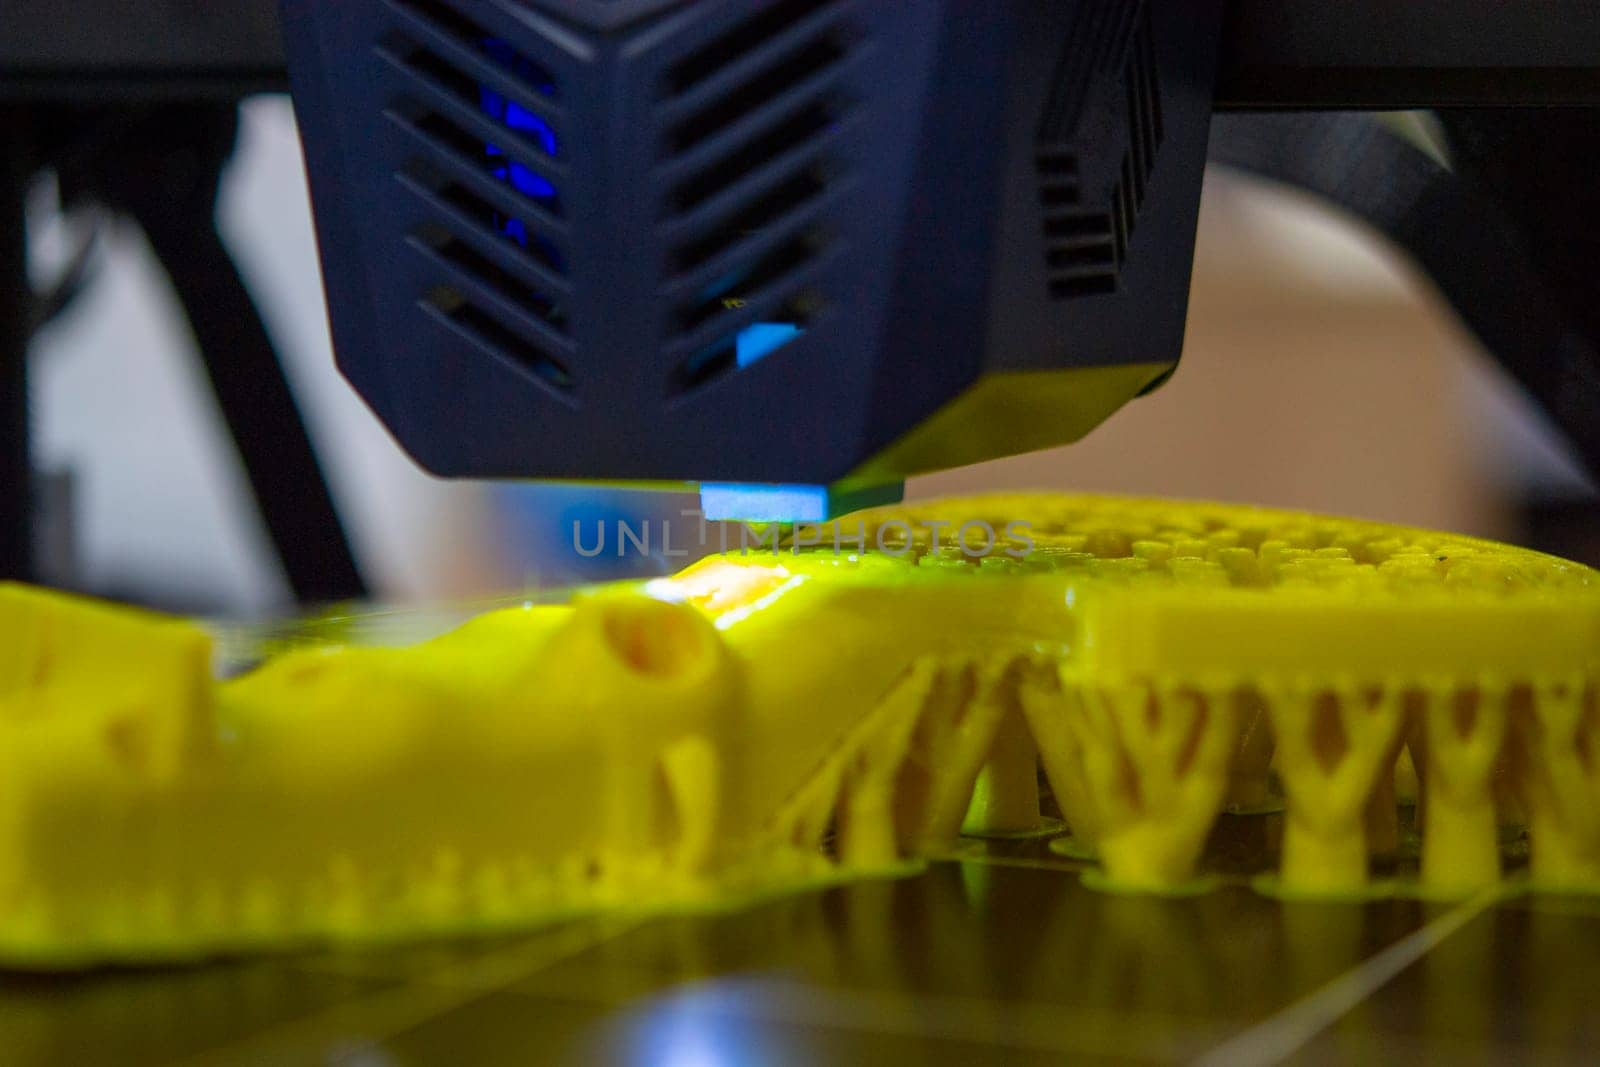 3D printer close up. A working 3D printer in process of printing object from molten plastic. 3D printer creating model by flowing liquid plastic from an extruder of printer. 3D printing technology